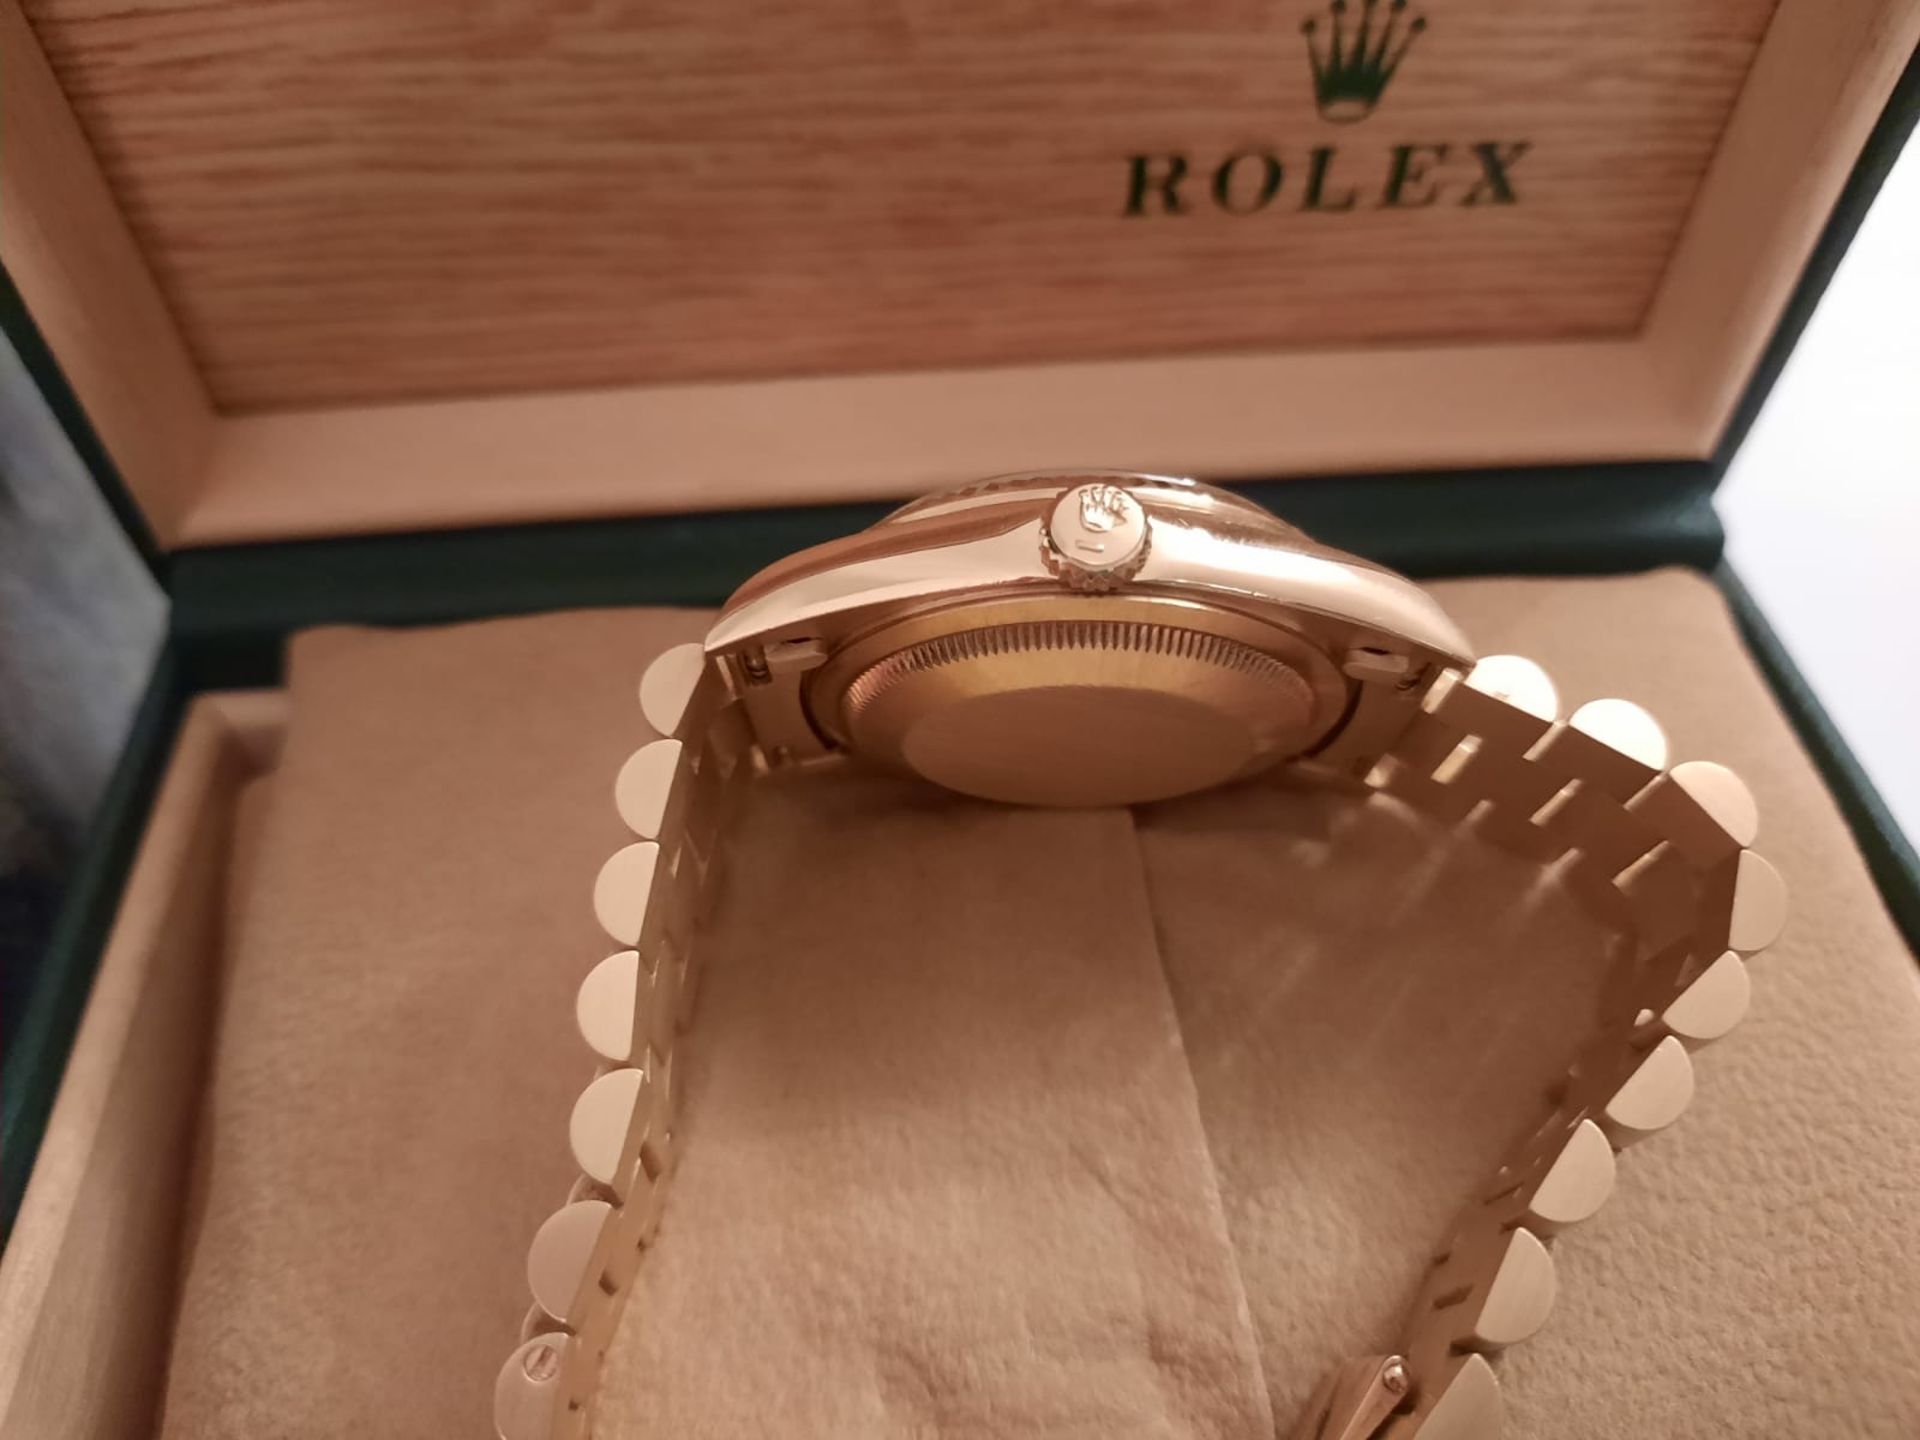 GENTS 18ct GOLD ROLEX OYSTER PERPETUAL DAY DATE WRIST WATCH WITH BOX AND PAPER WORK - Image 4 of 5